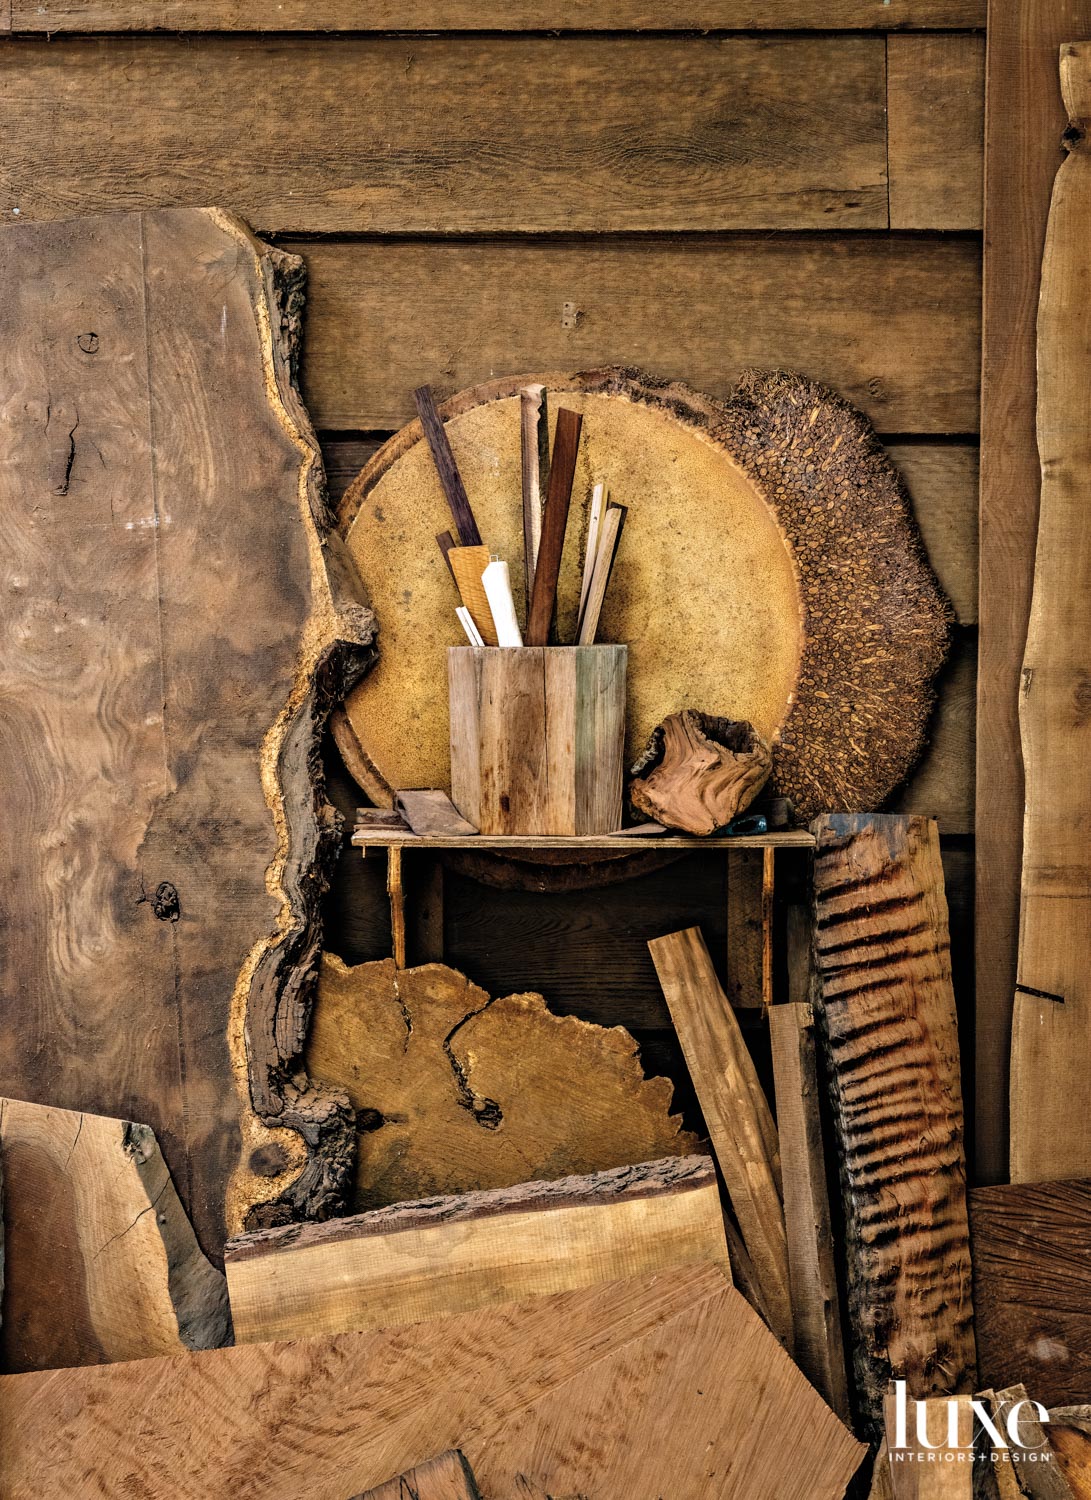 Wood pieces are displayed in an artist's studio.